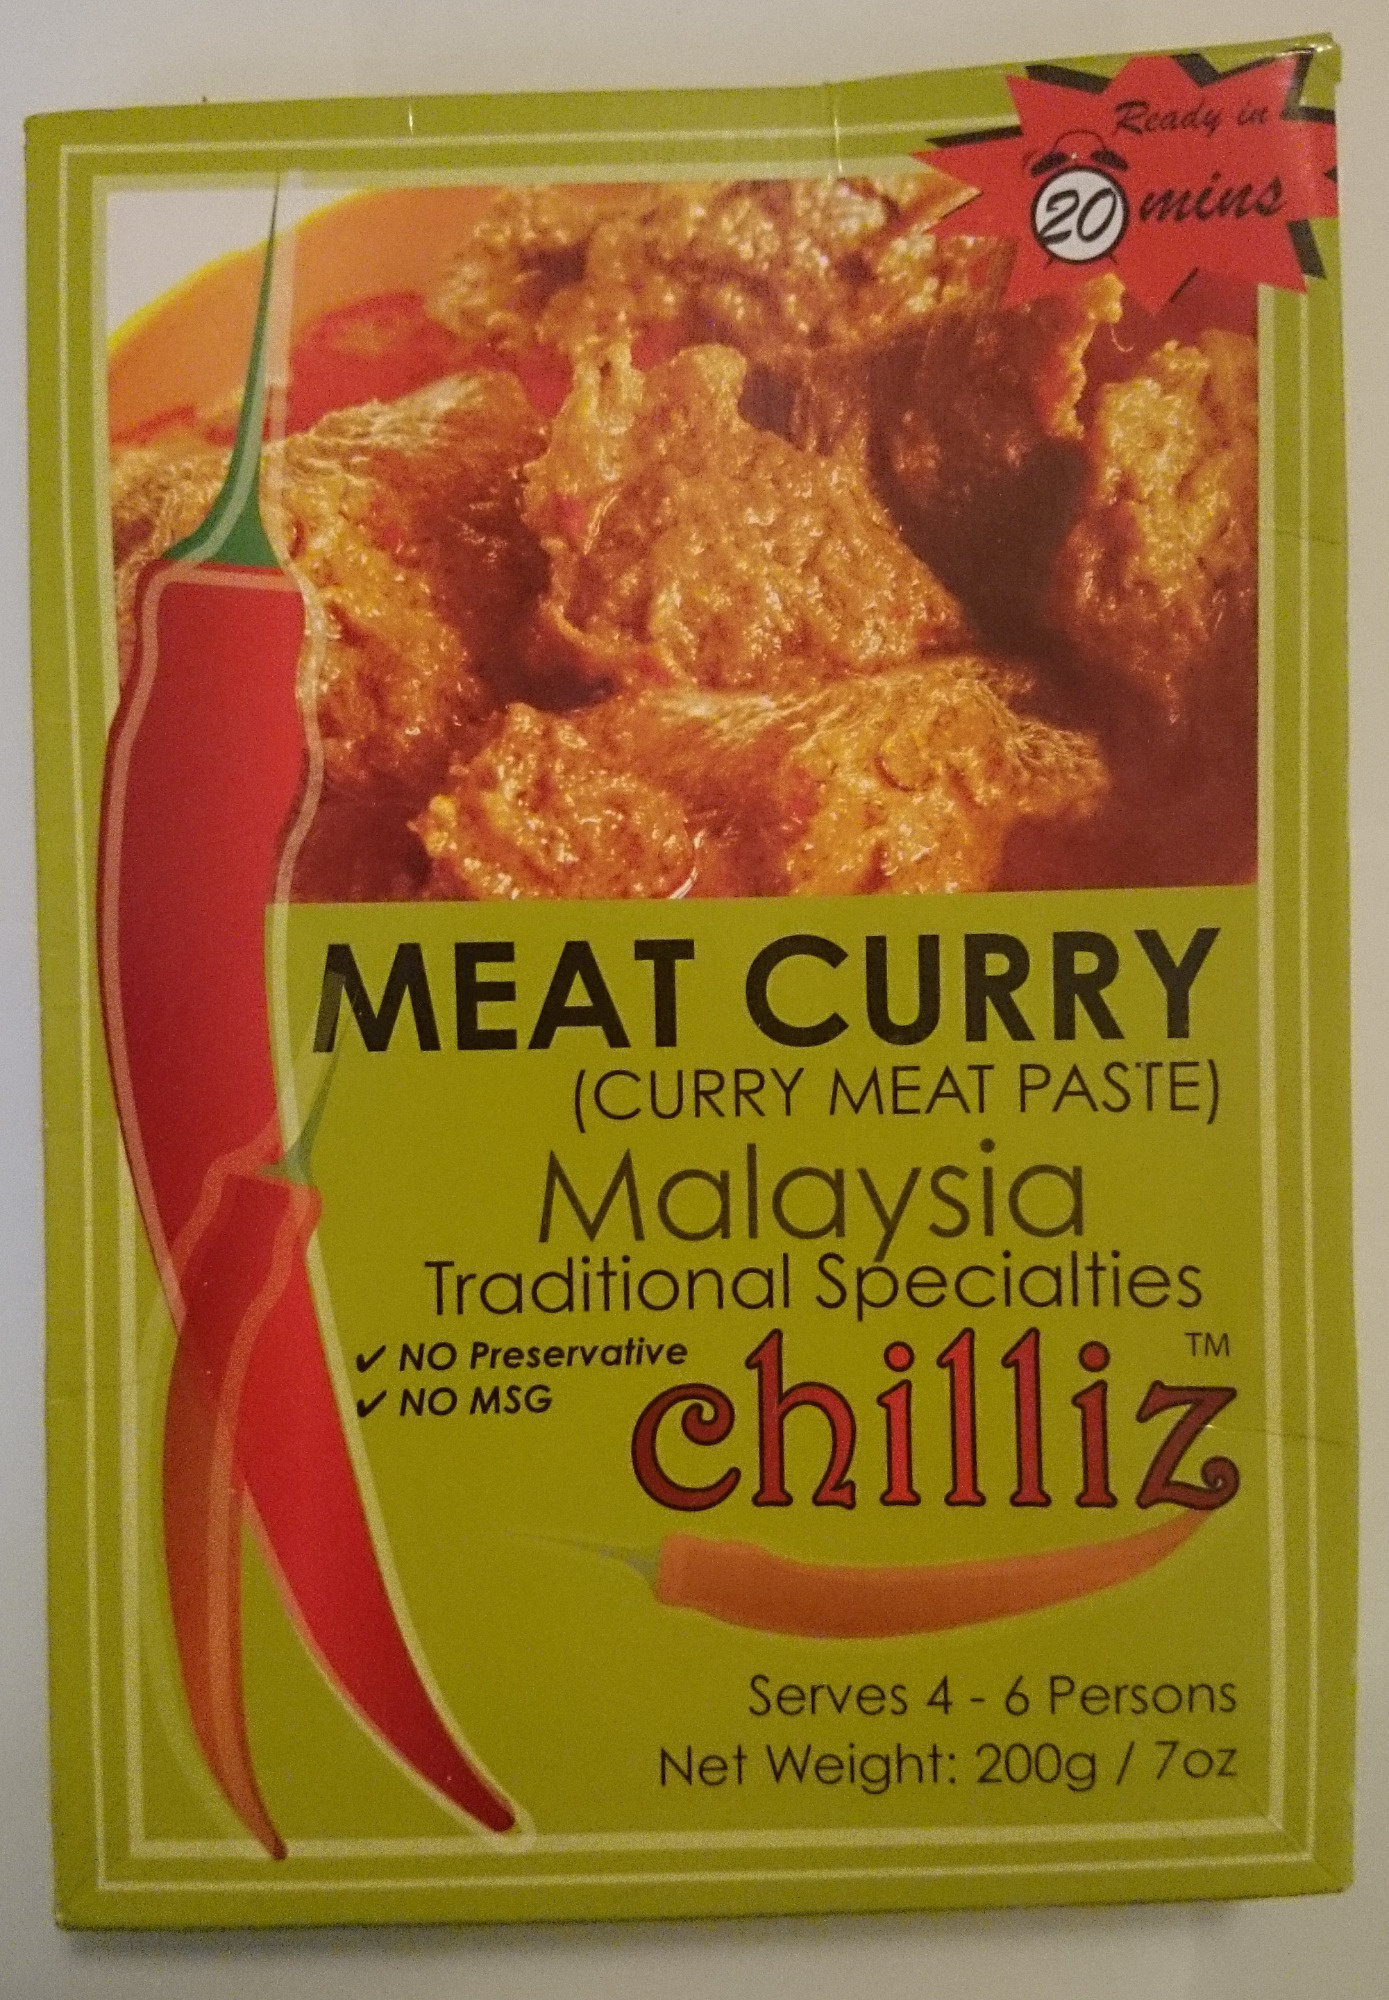 Chilliz Meat Curry Curry Meat Paste - Producto - en